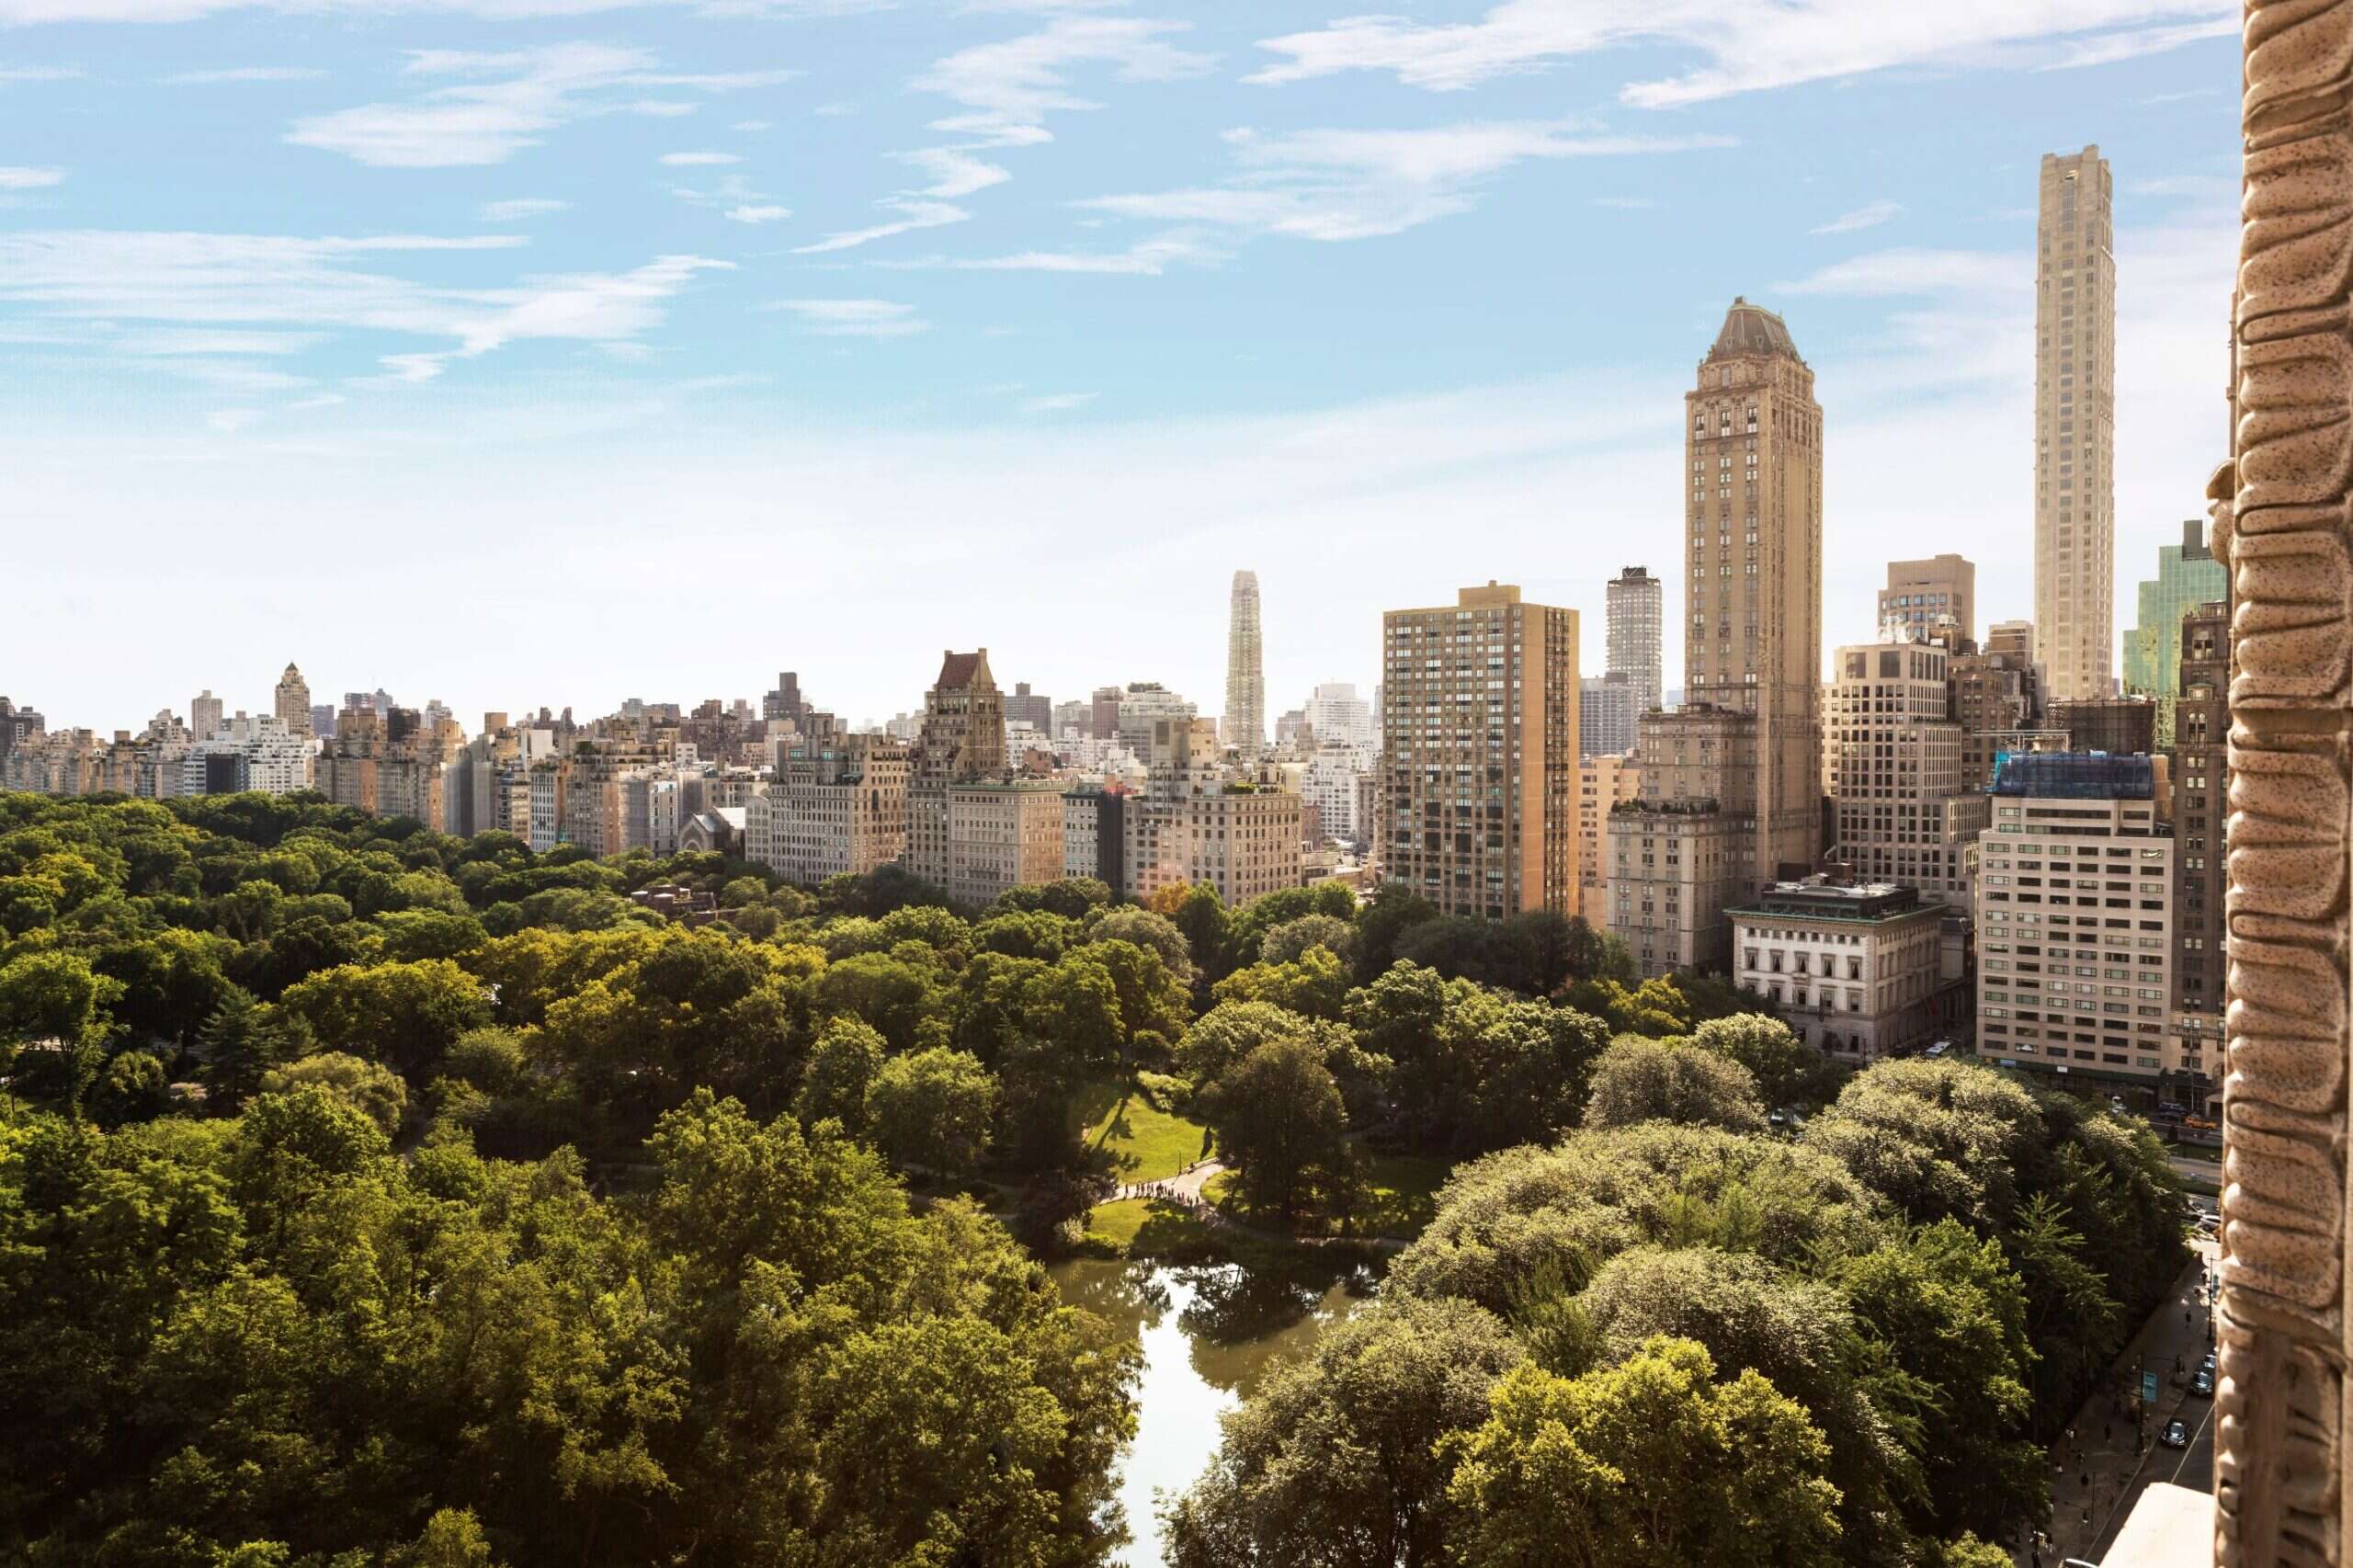 The New York Hotels with the Best Views of the City